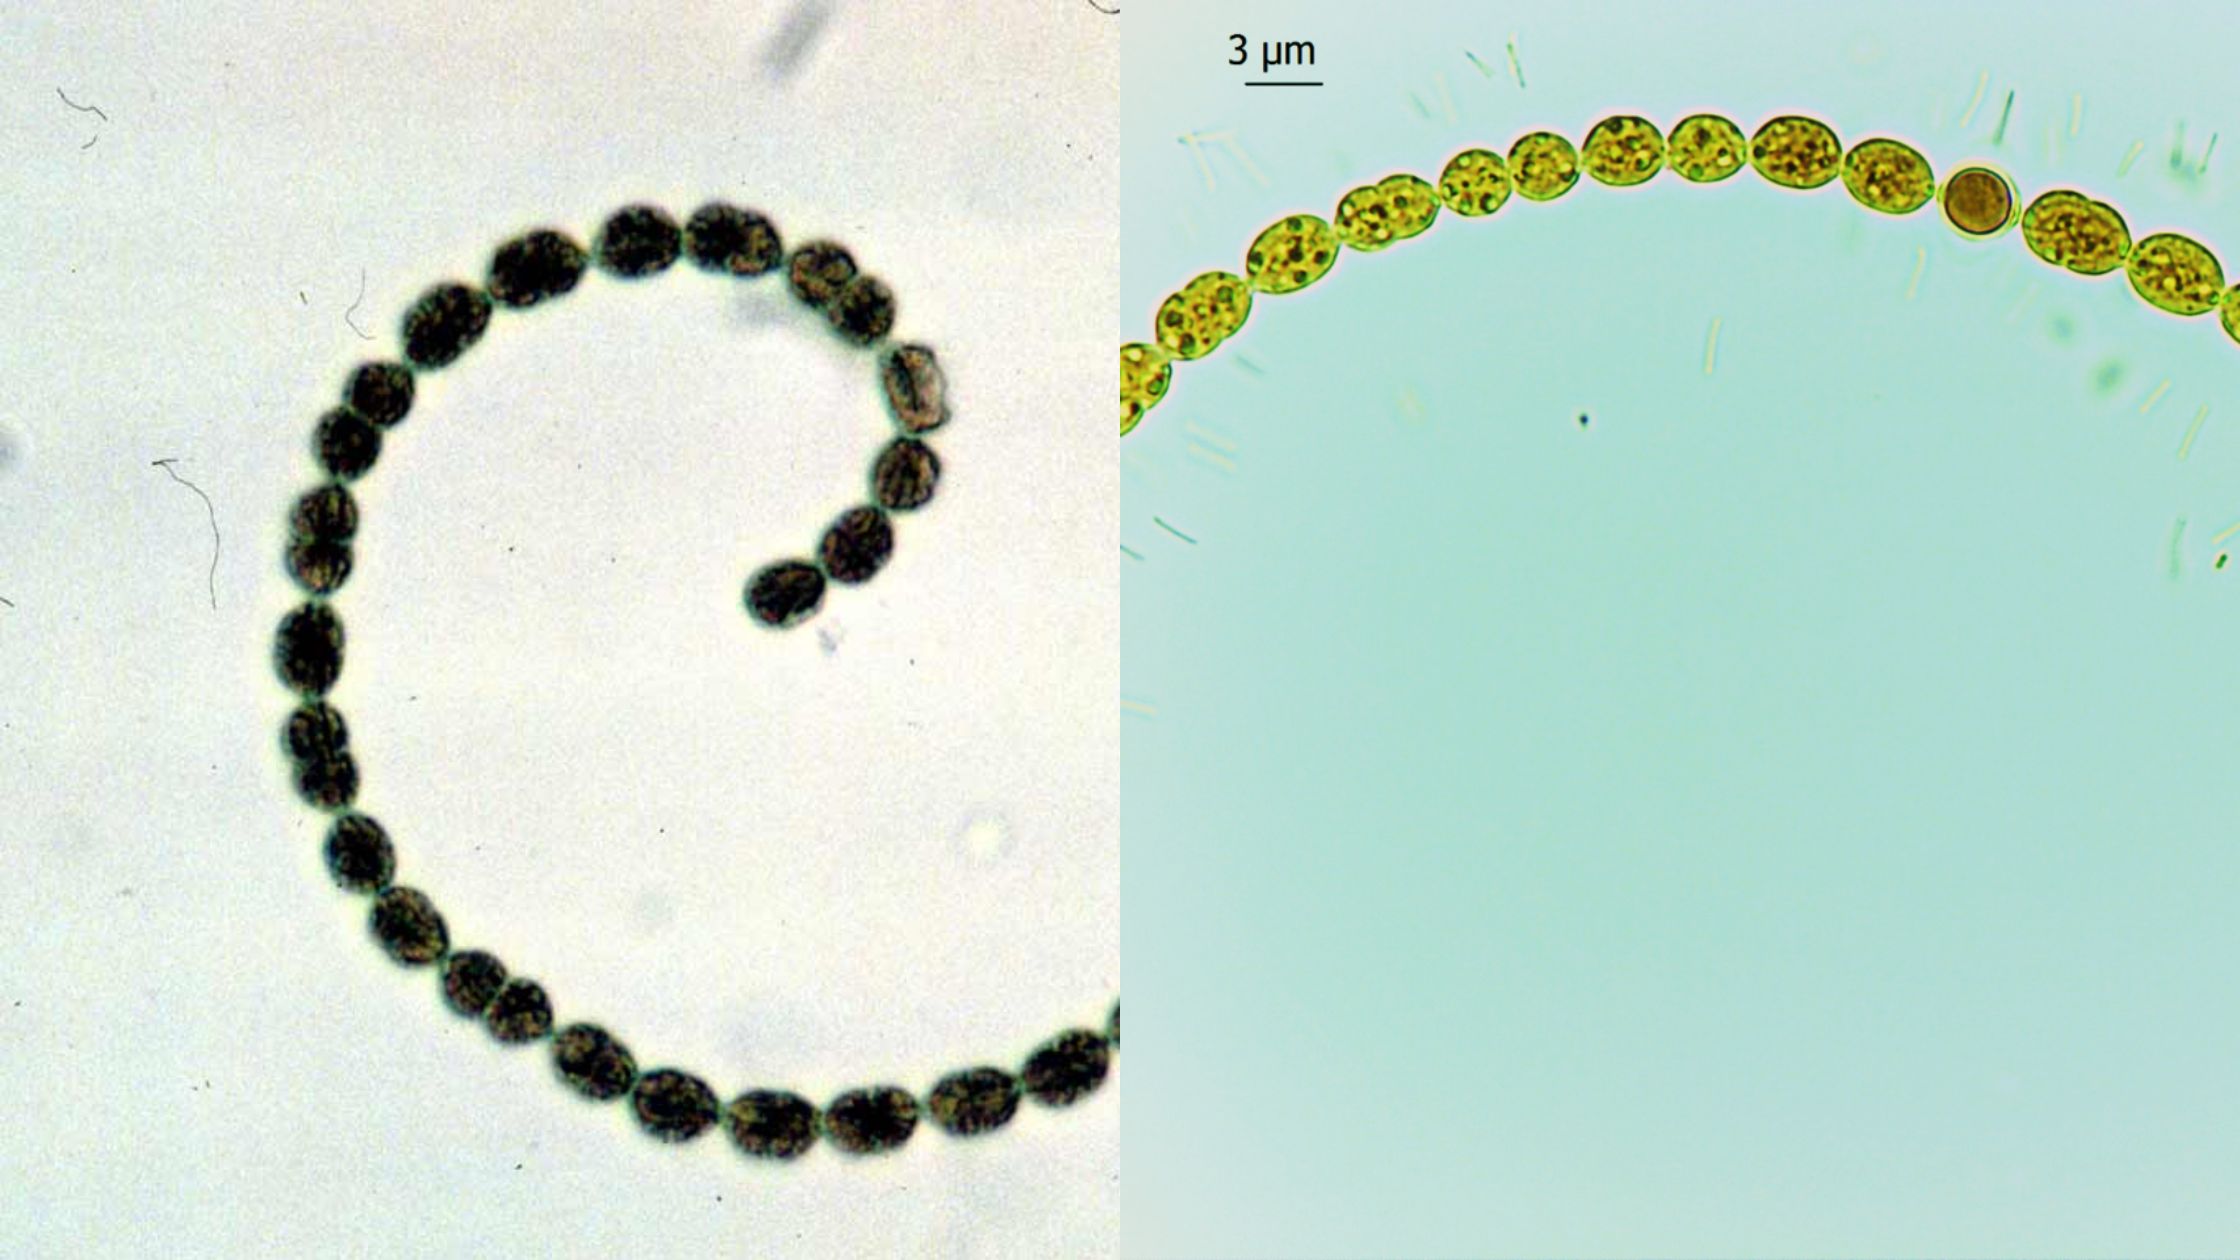 Anabaena - Definition, Structure, Reproduction, Importance